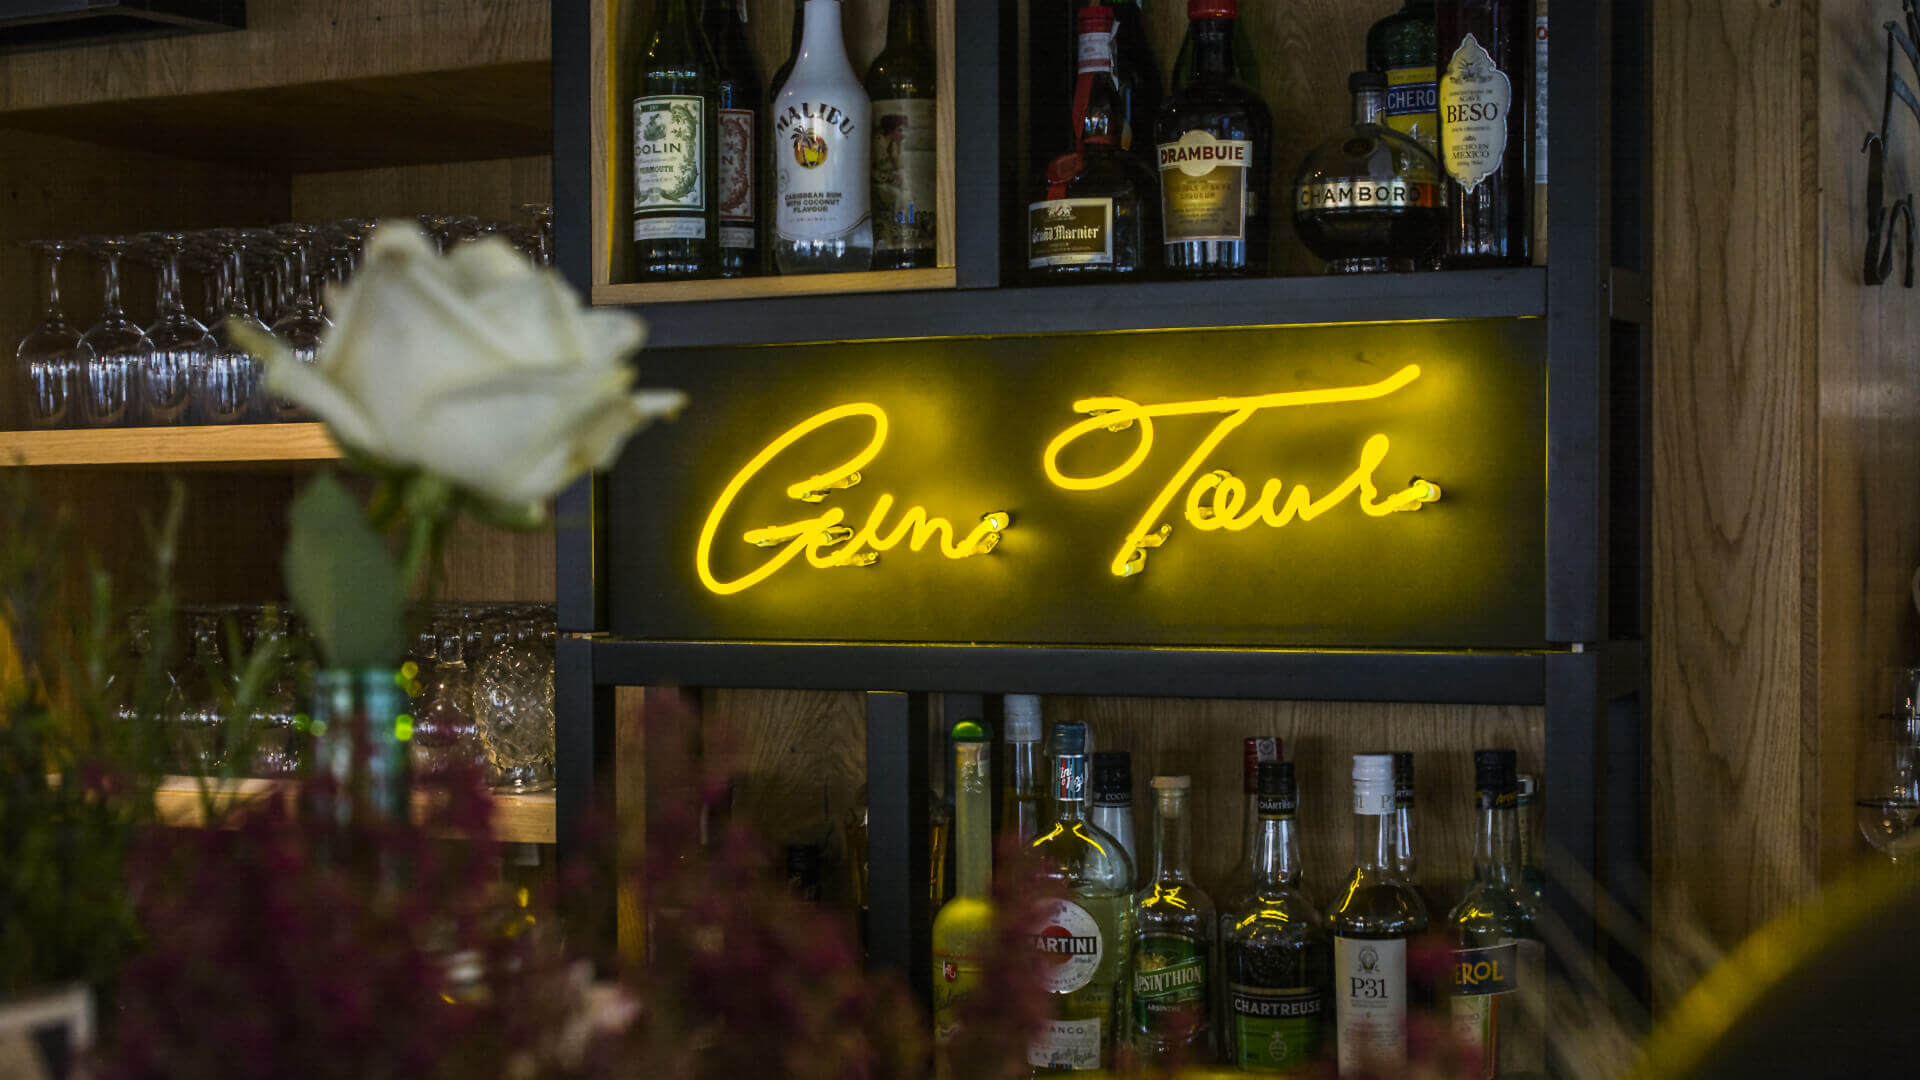 Gintur Gin tour - Gin-tour-neon-behind-the-bar-restaurant-neon-on-the-wall-under-lighted-glass-neon-company-logo-neon-on-the-polish-between-bottles-cafeteria10-gdansk (21) 